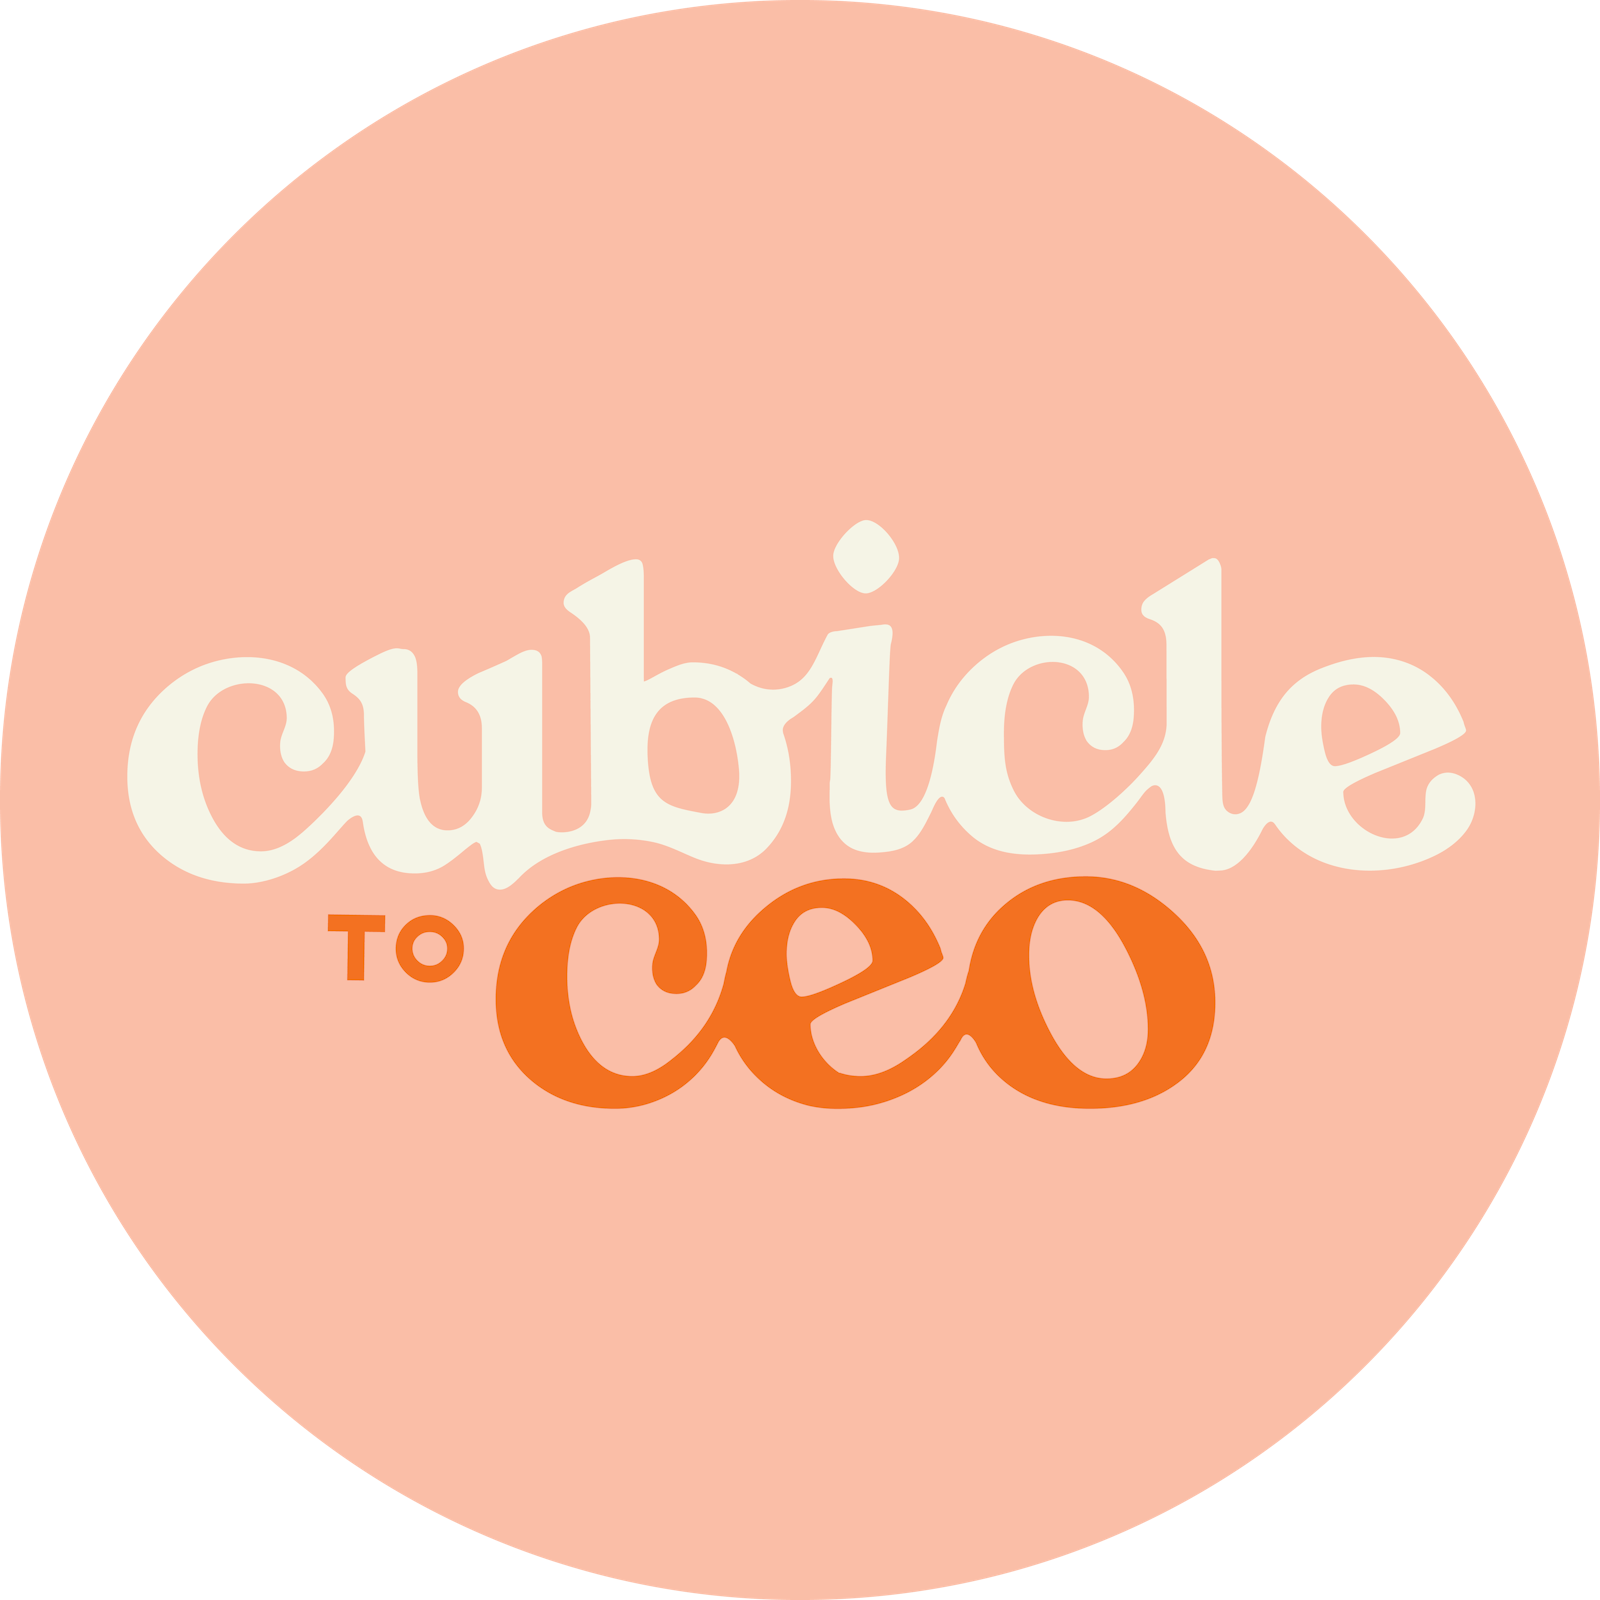 Follow Cubicle to CEO on Insta 🌟